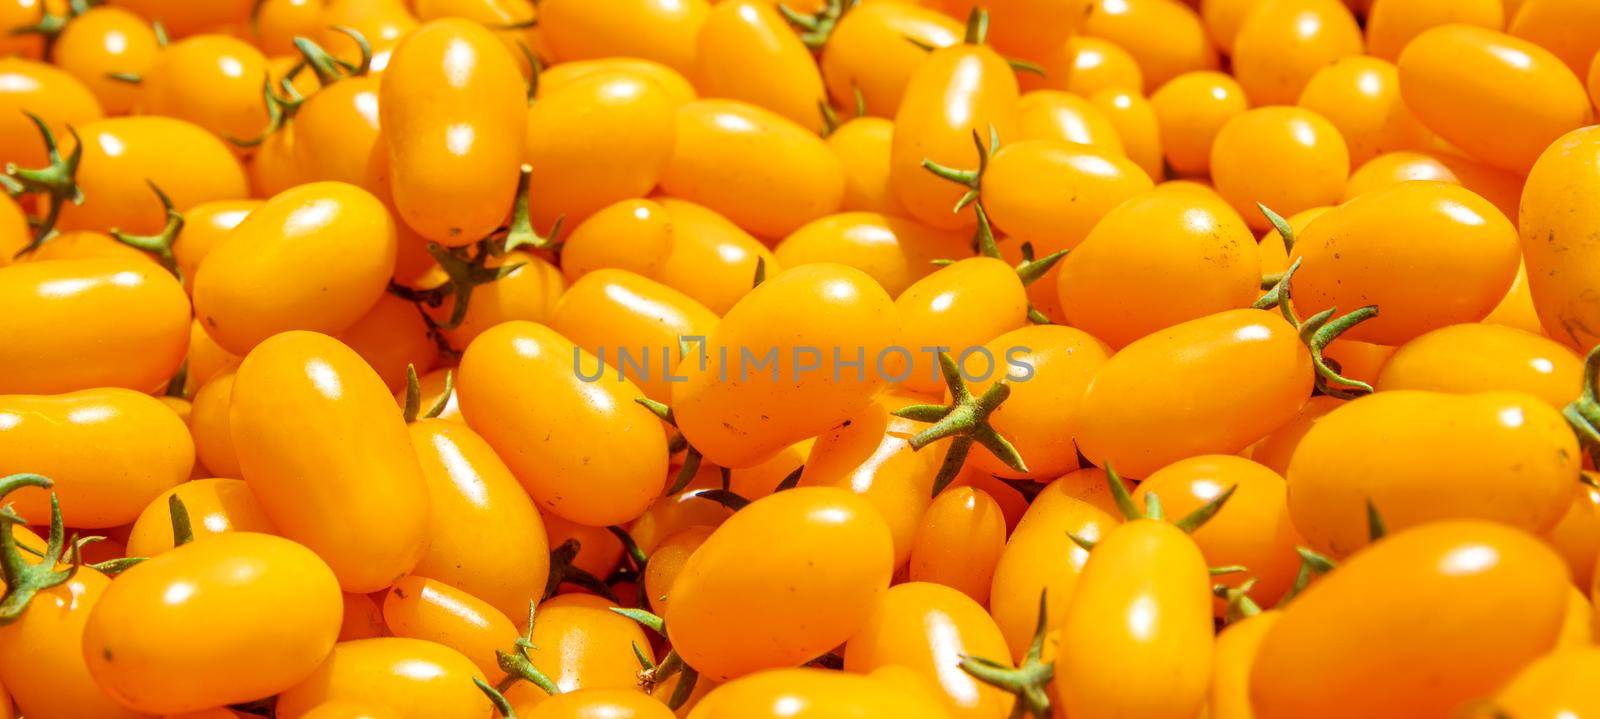 background from yellow ripe tomatoes grown without chemistry, banner by Edophoto